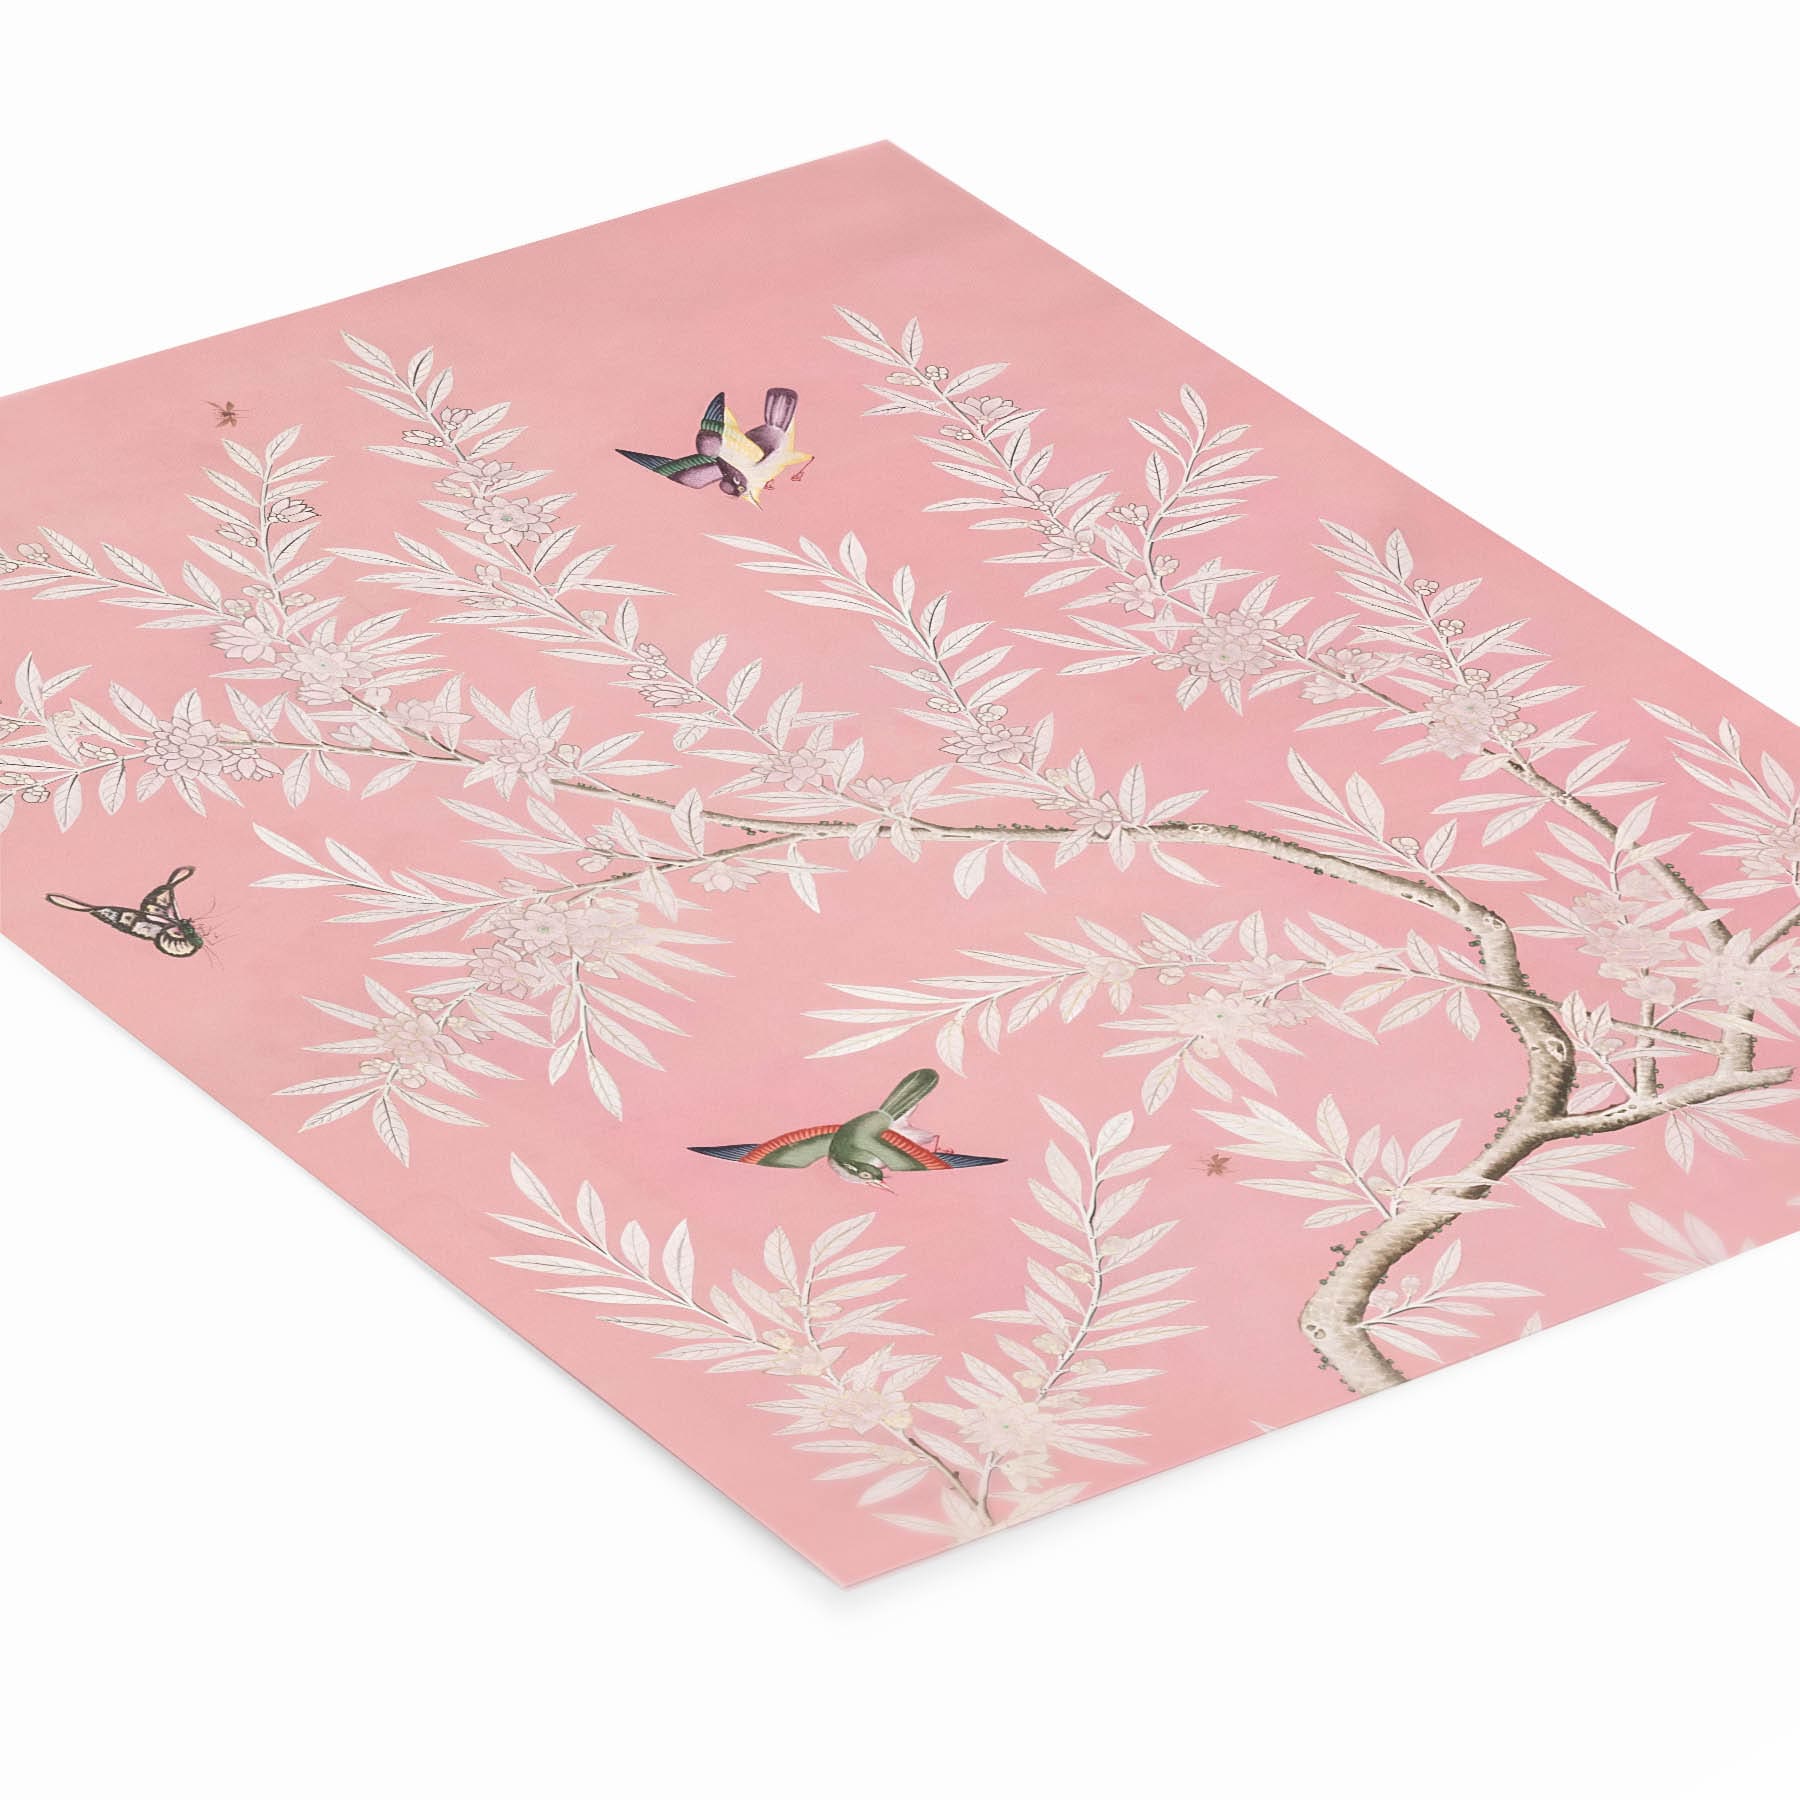 Pink Floral Art Print Laying Flat on a White Background